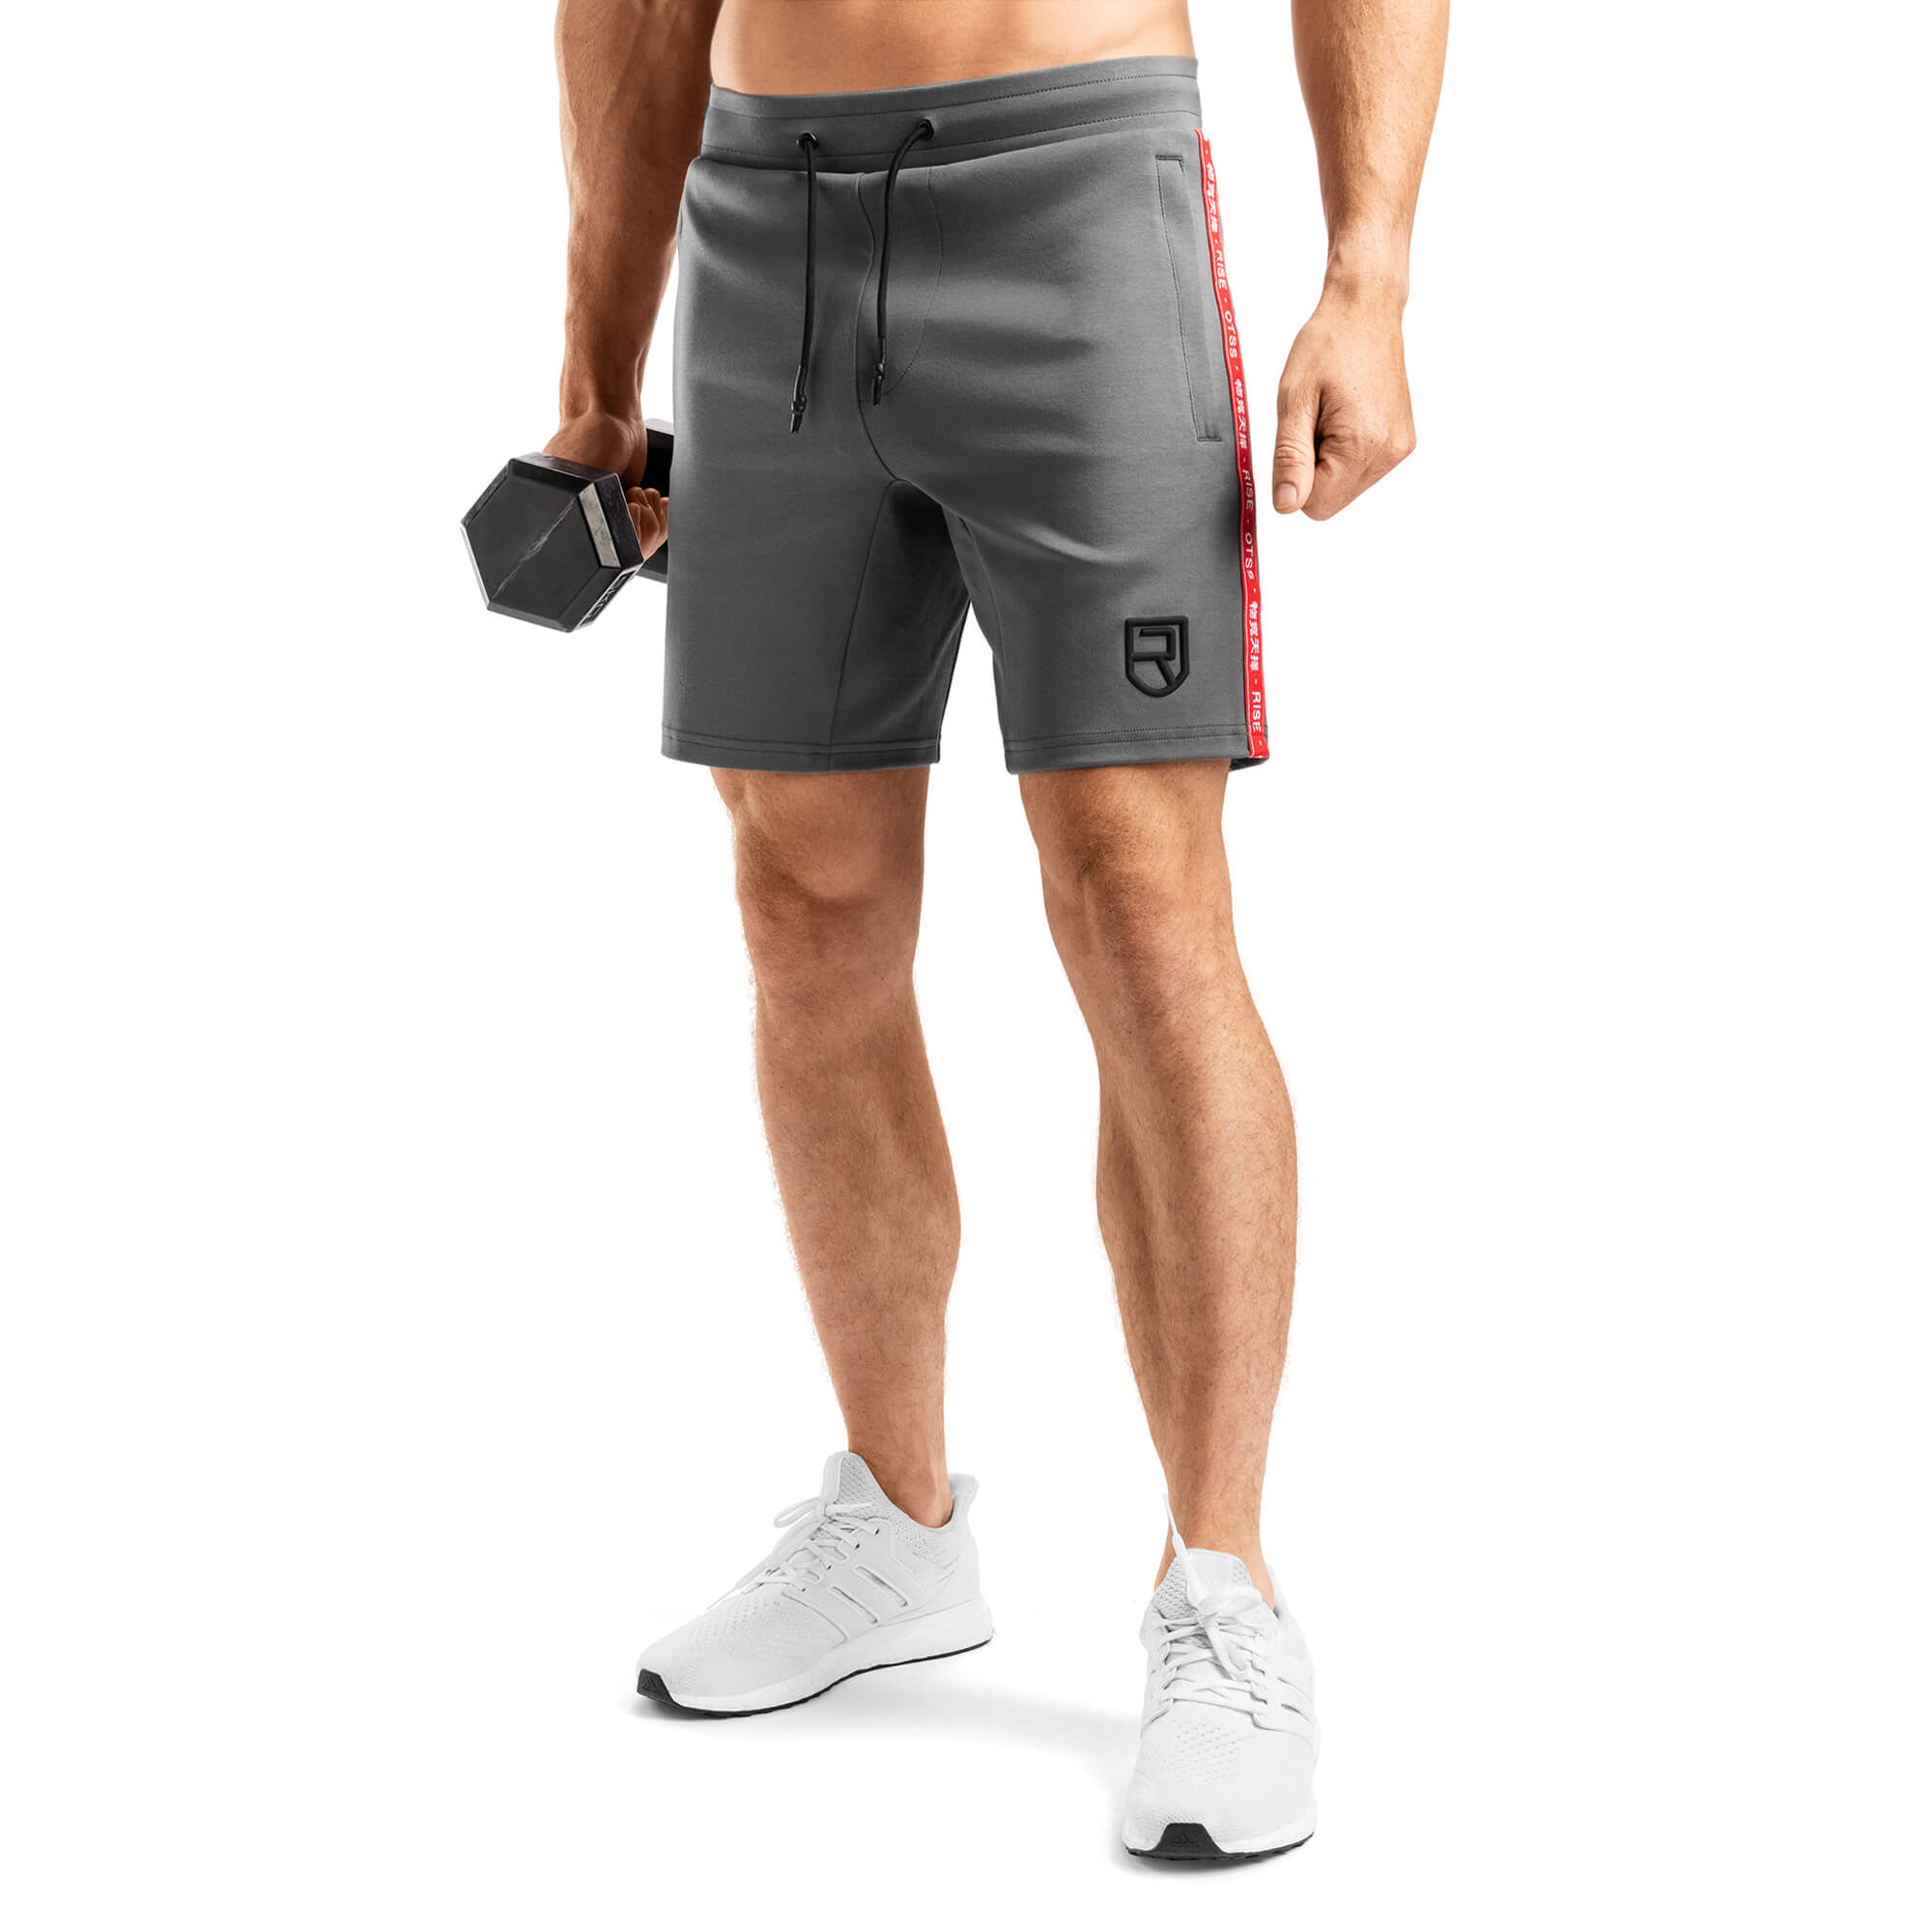 Active Dry Compression Shorts - White - Rise